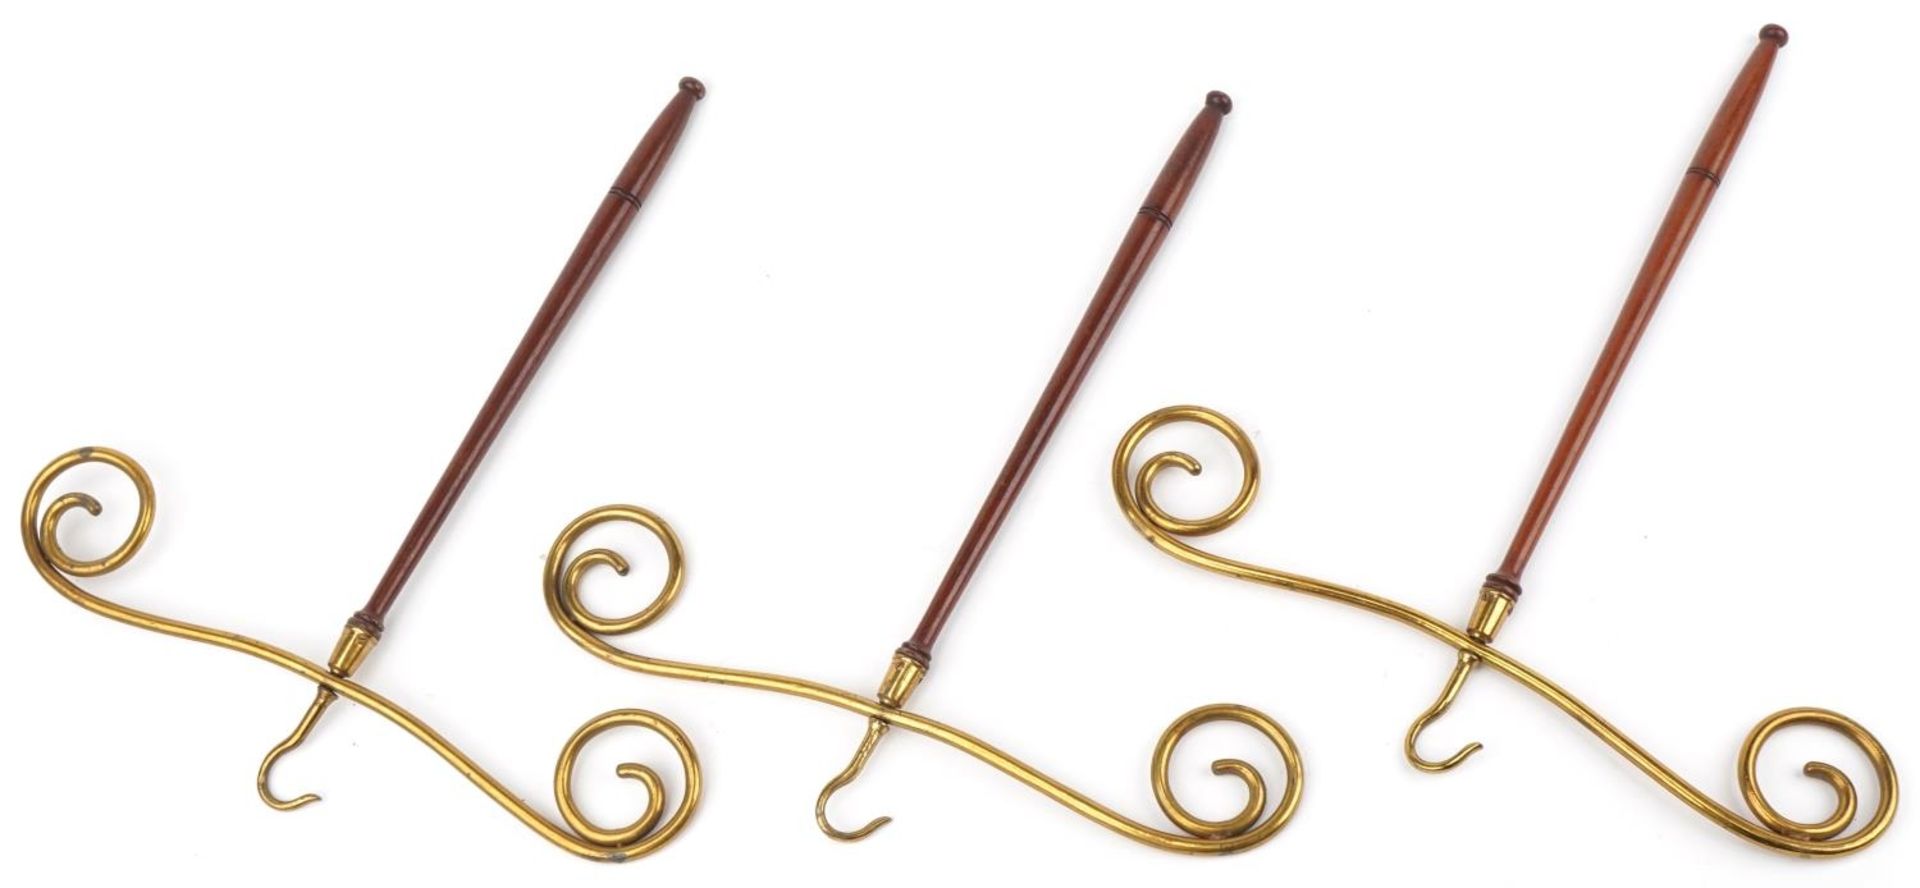 Three Edwardian mahogany and brass gown hangers, each 50cm high - Image 2 of 2